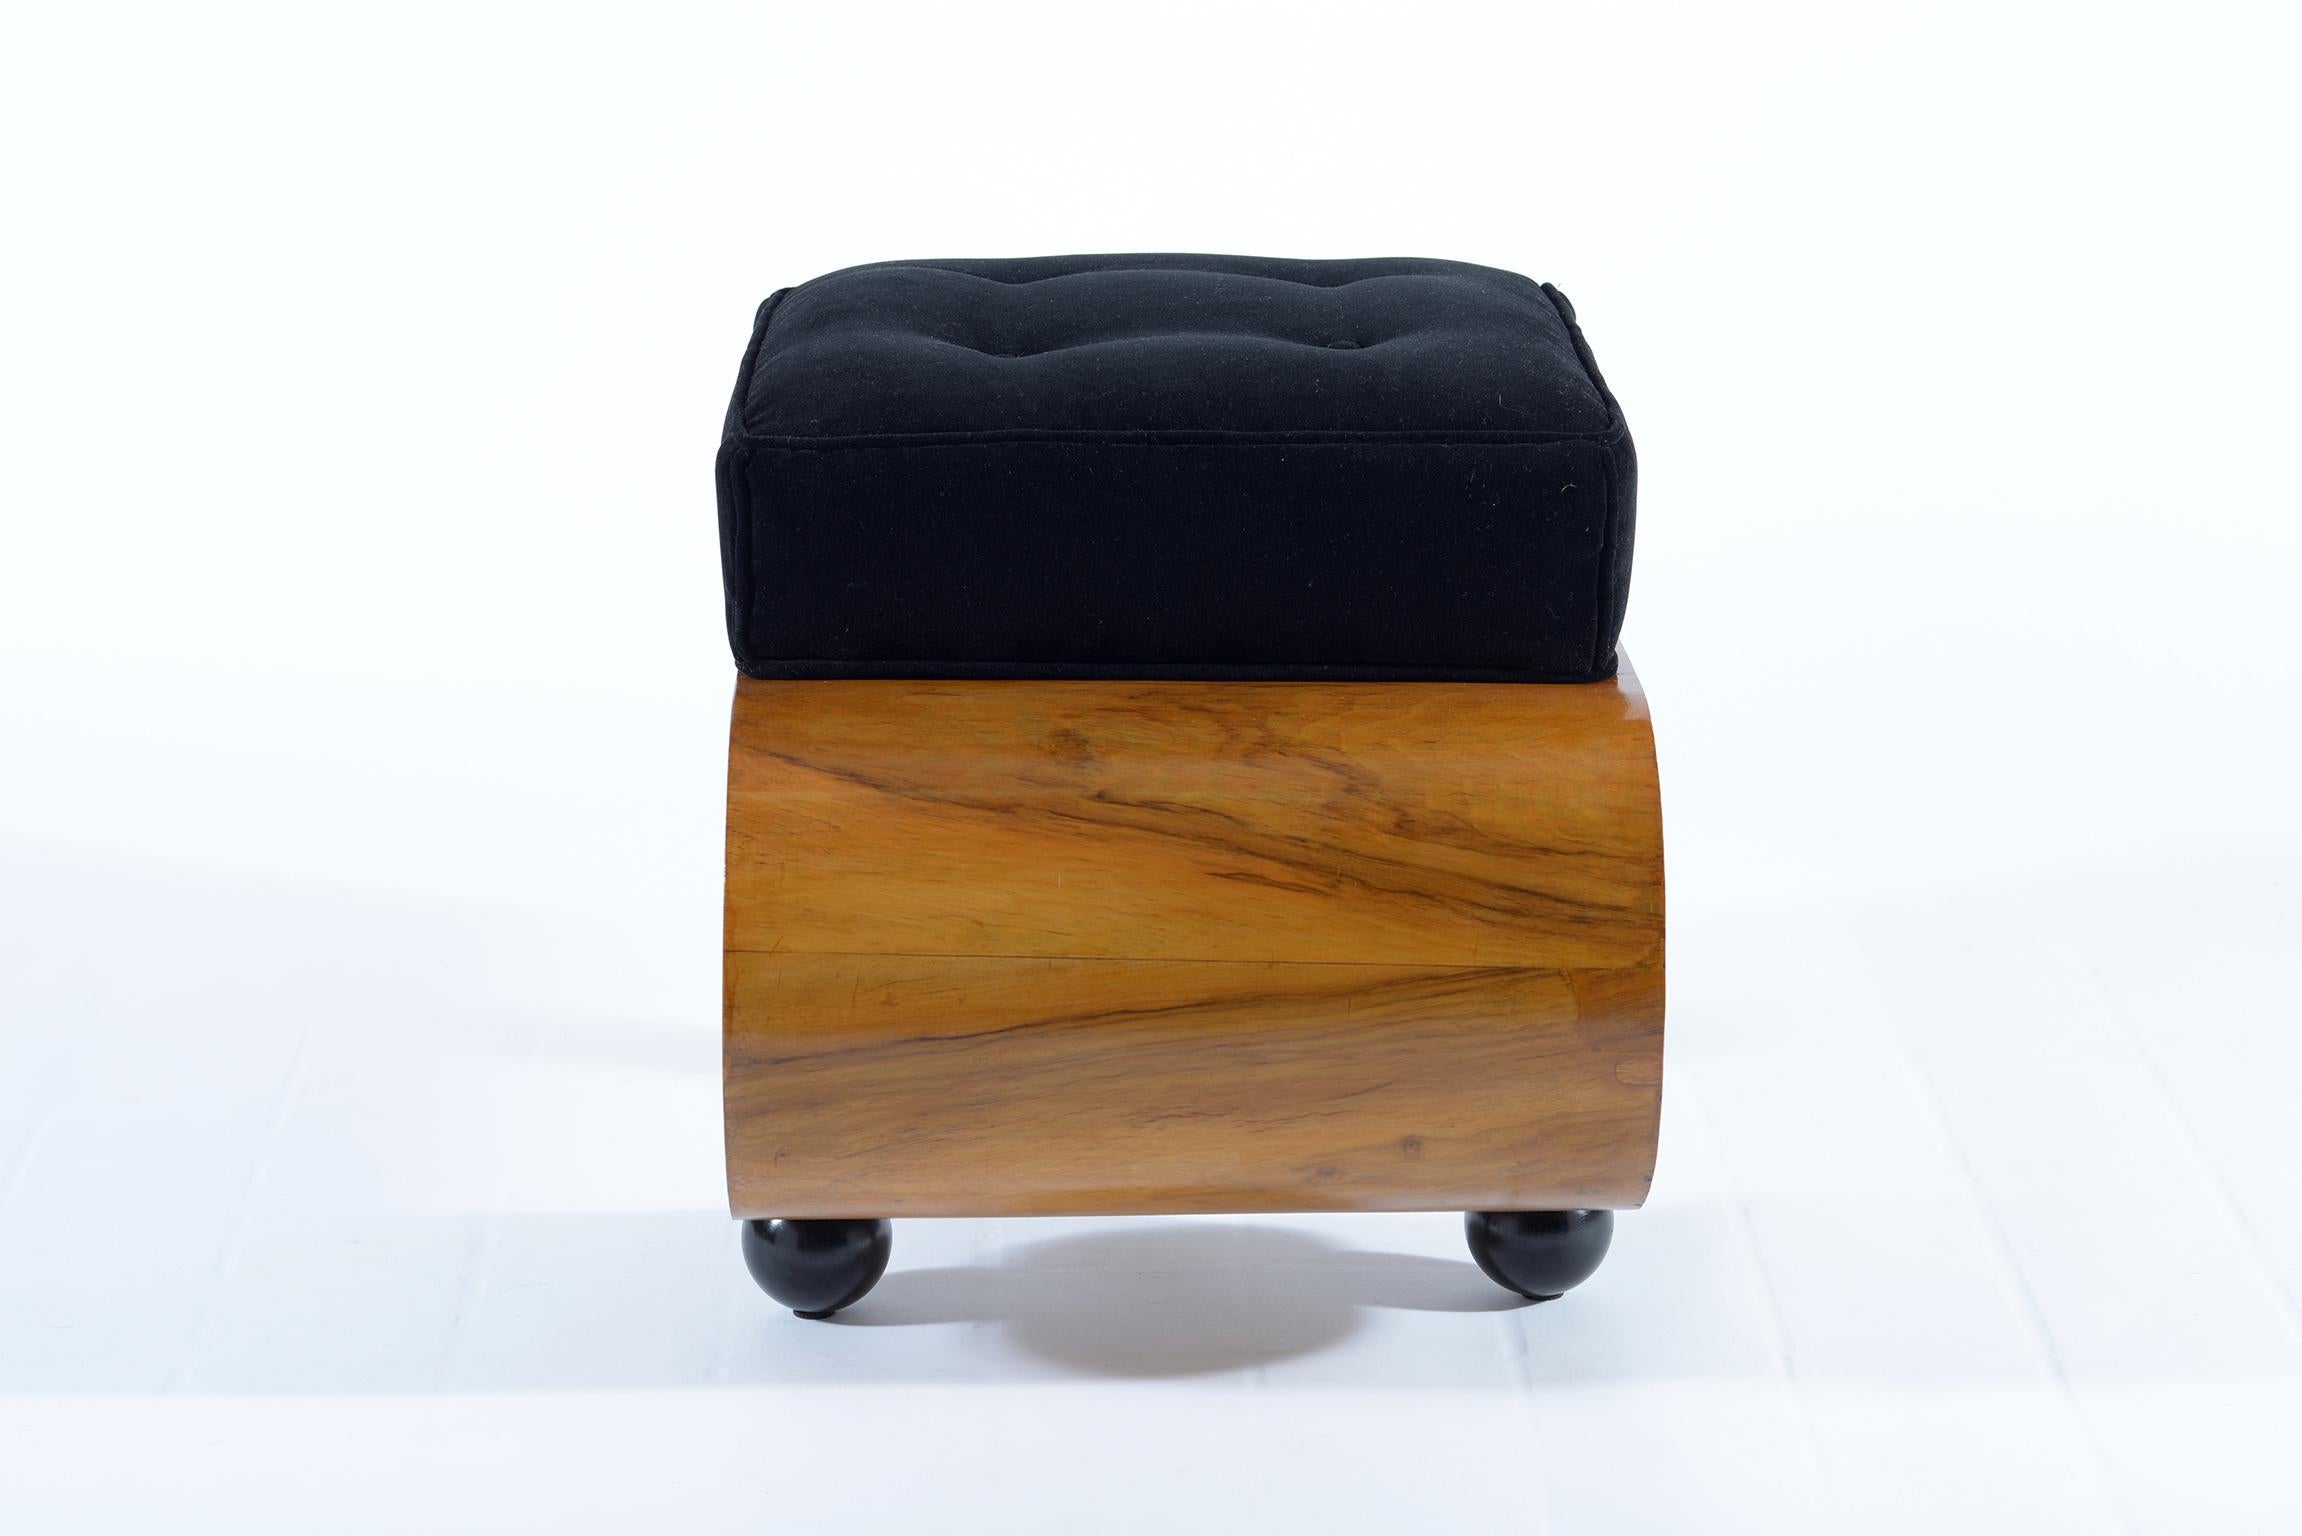 Italian Art Deco walnut stools, black lacquered wood and brass details, newly uphostrered with black velvet.
Italy 1930.